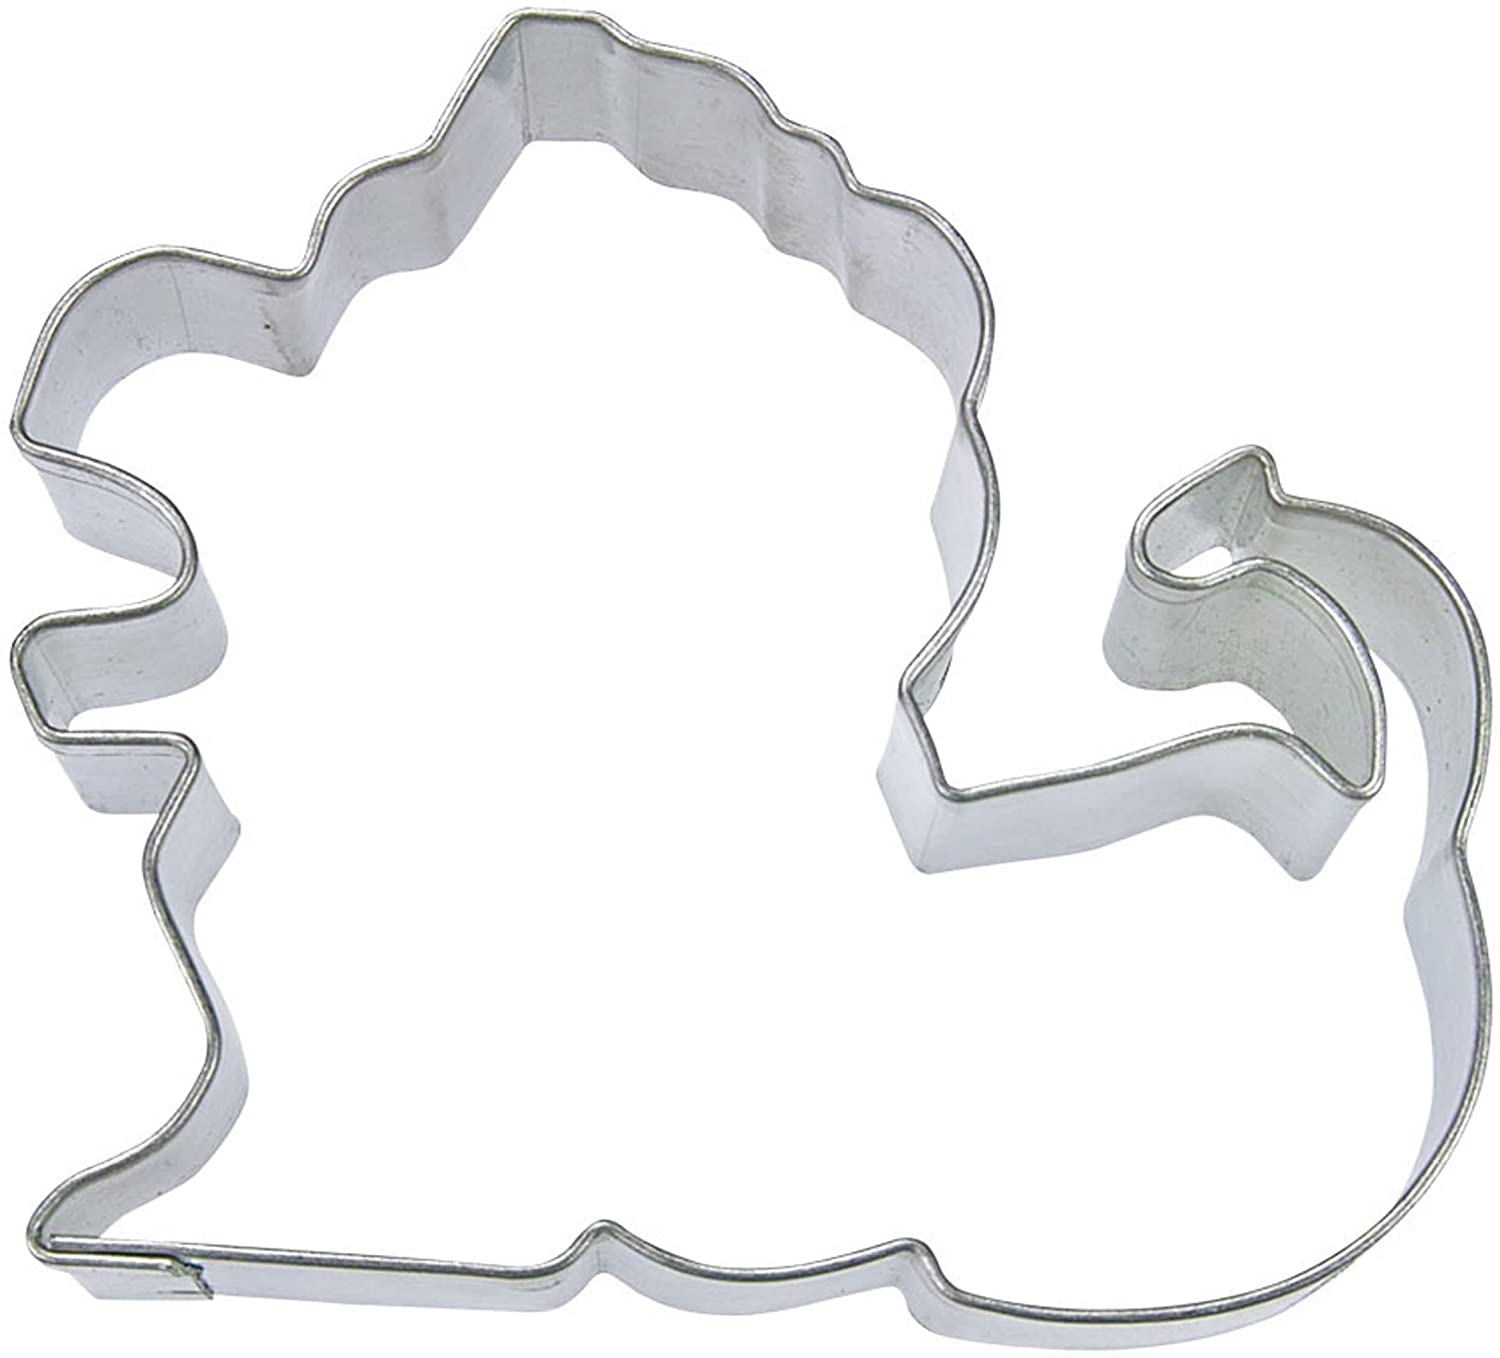 Staedter Cookie Cutters Star Sign Leo